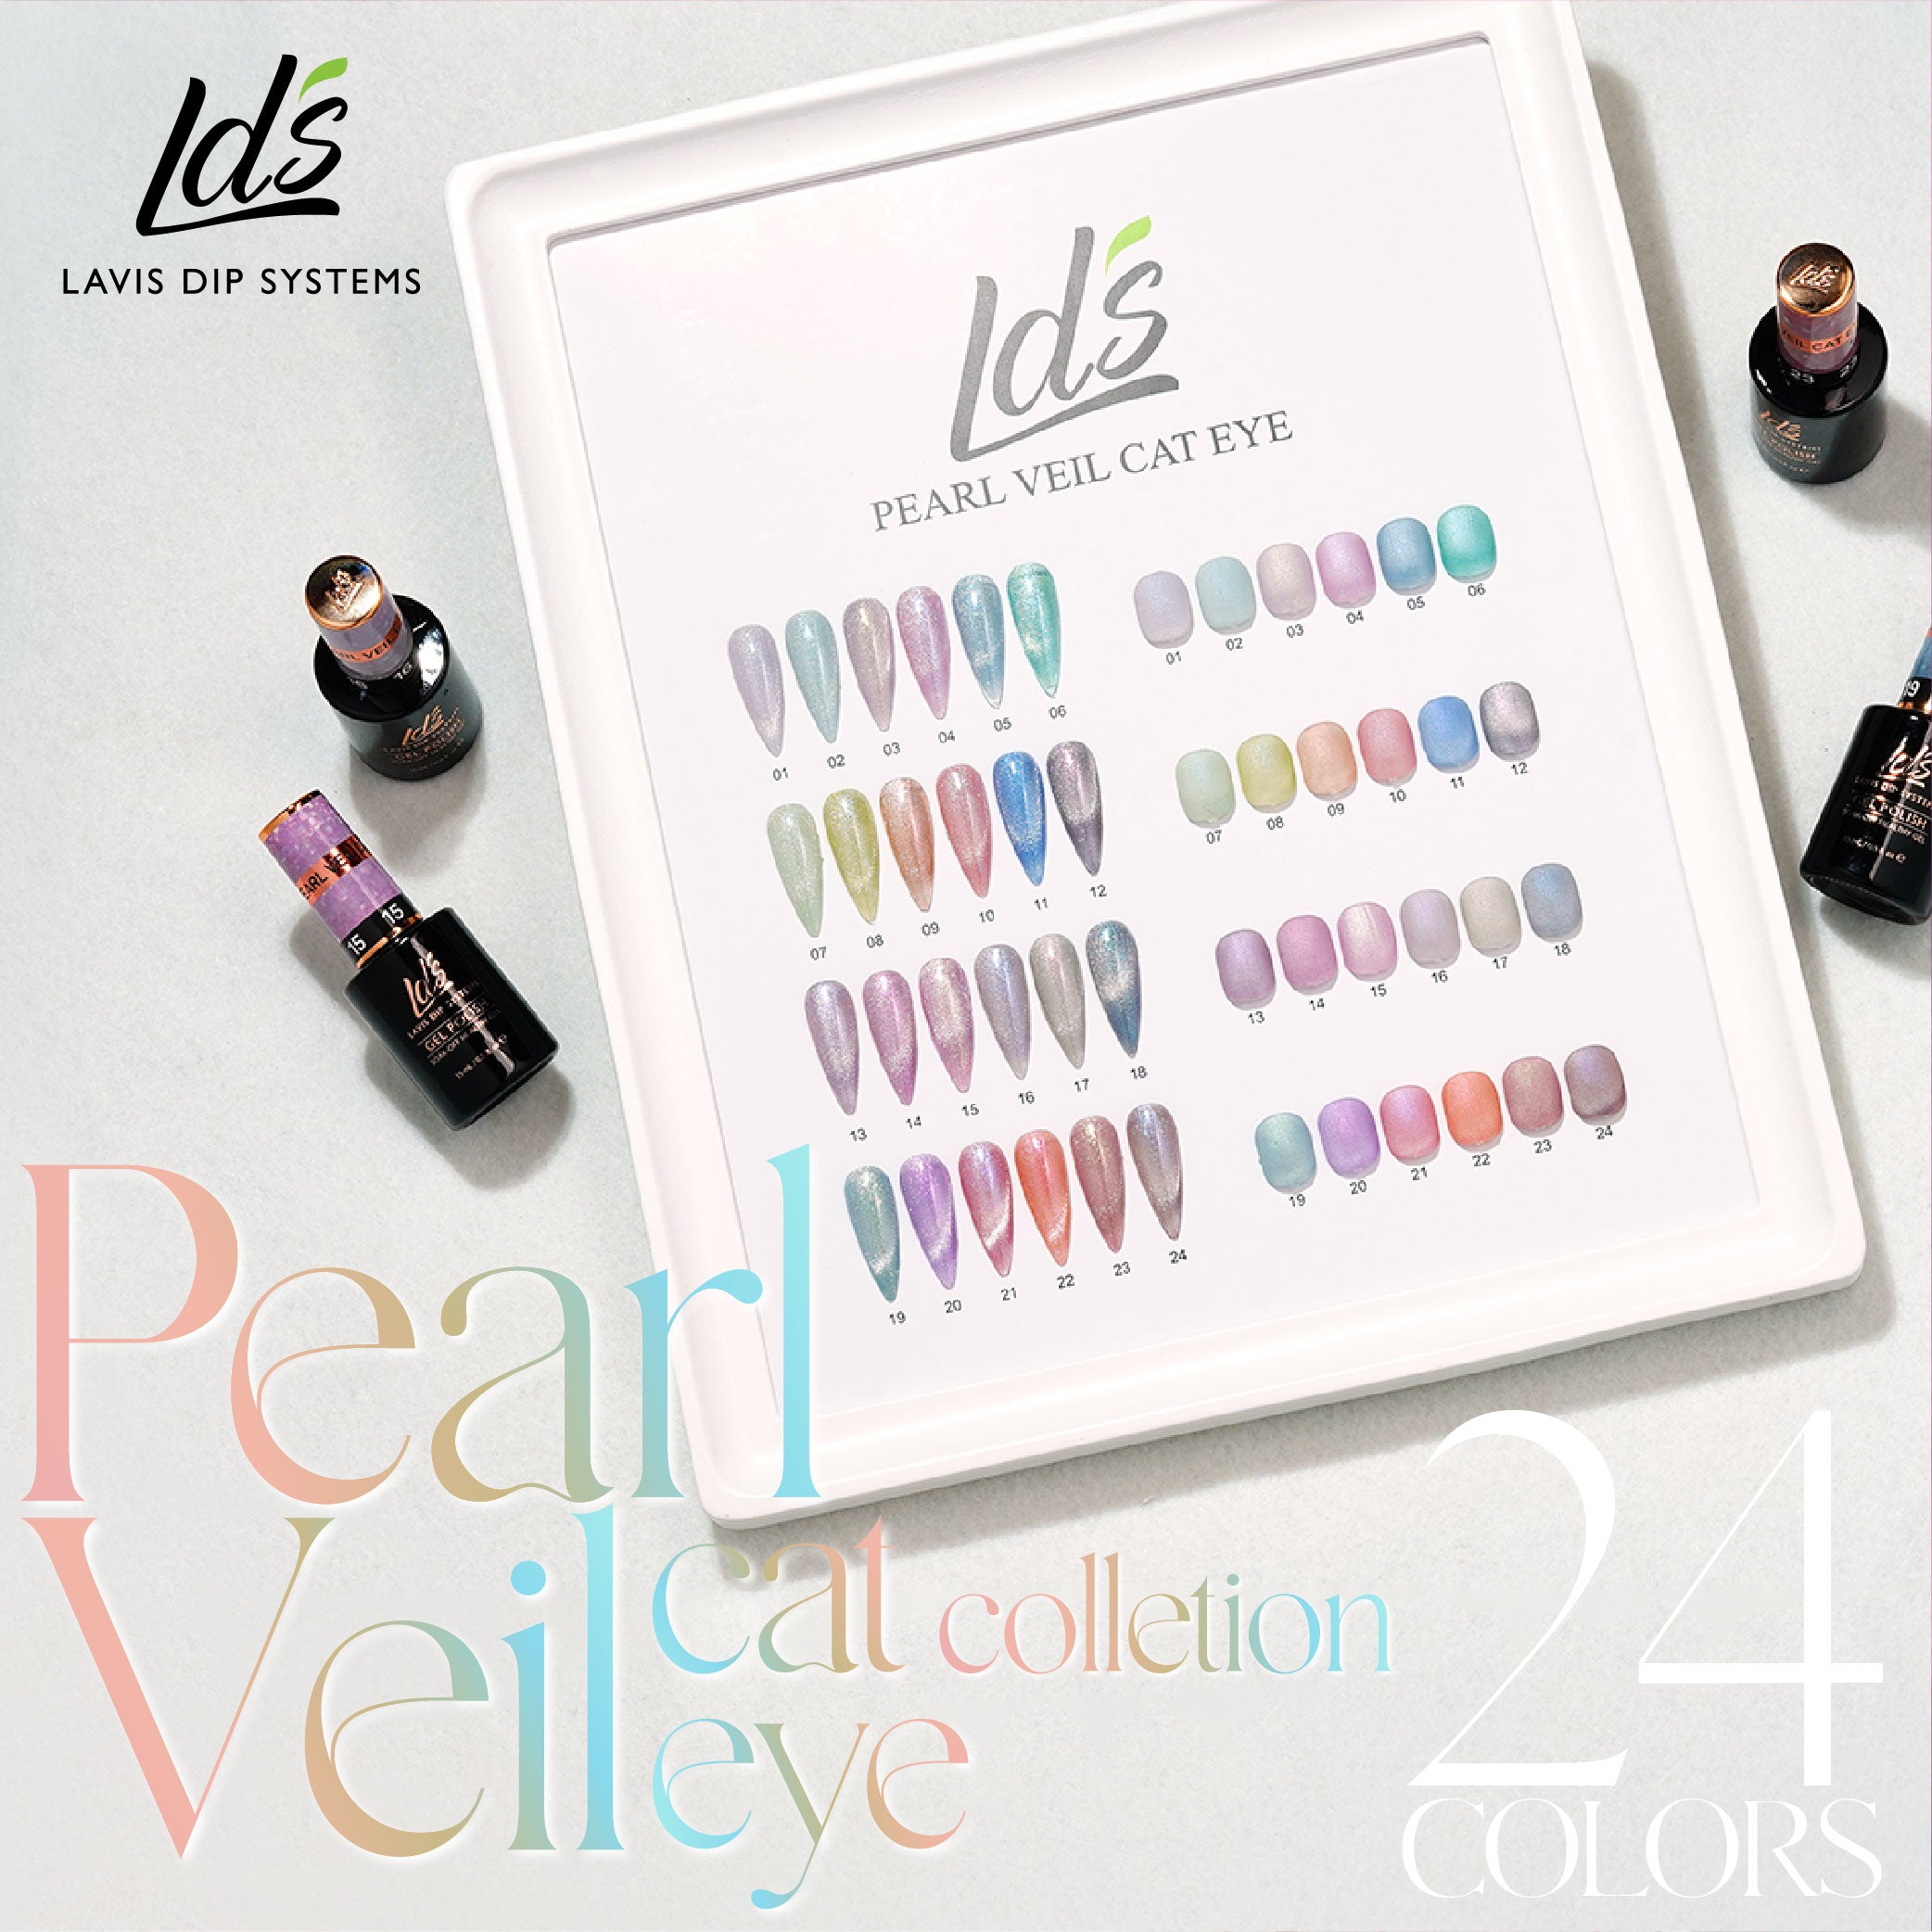 LDS Pearl CE - 08 - Pearl Veil Cat Eye Collection